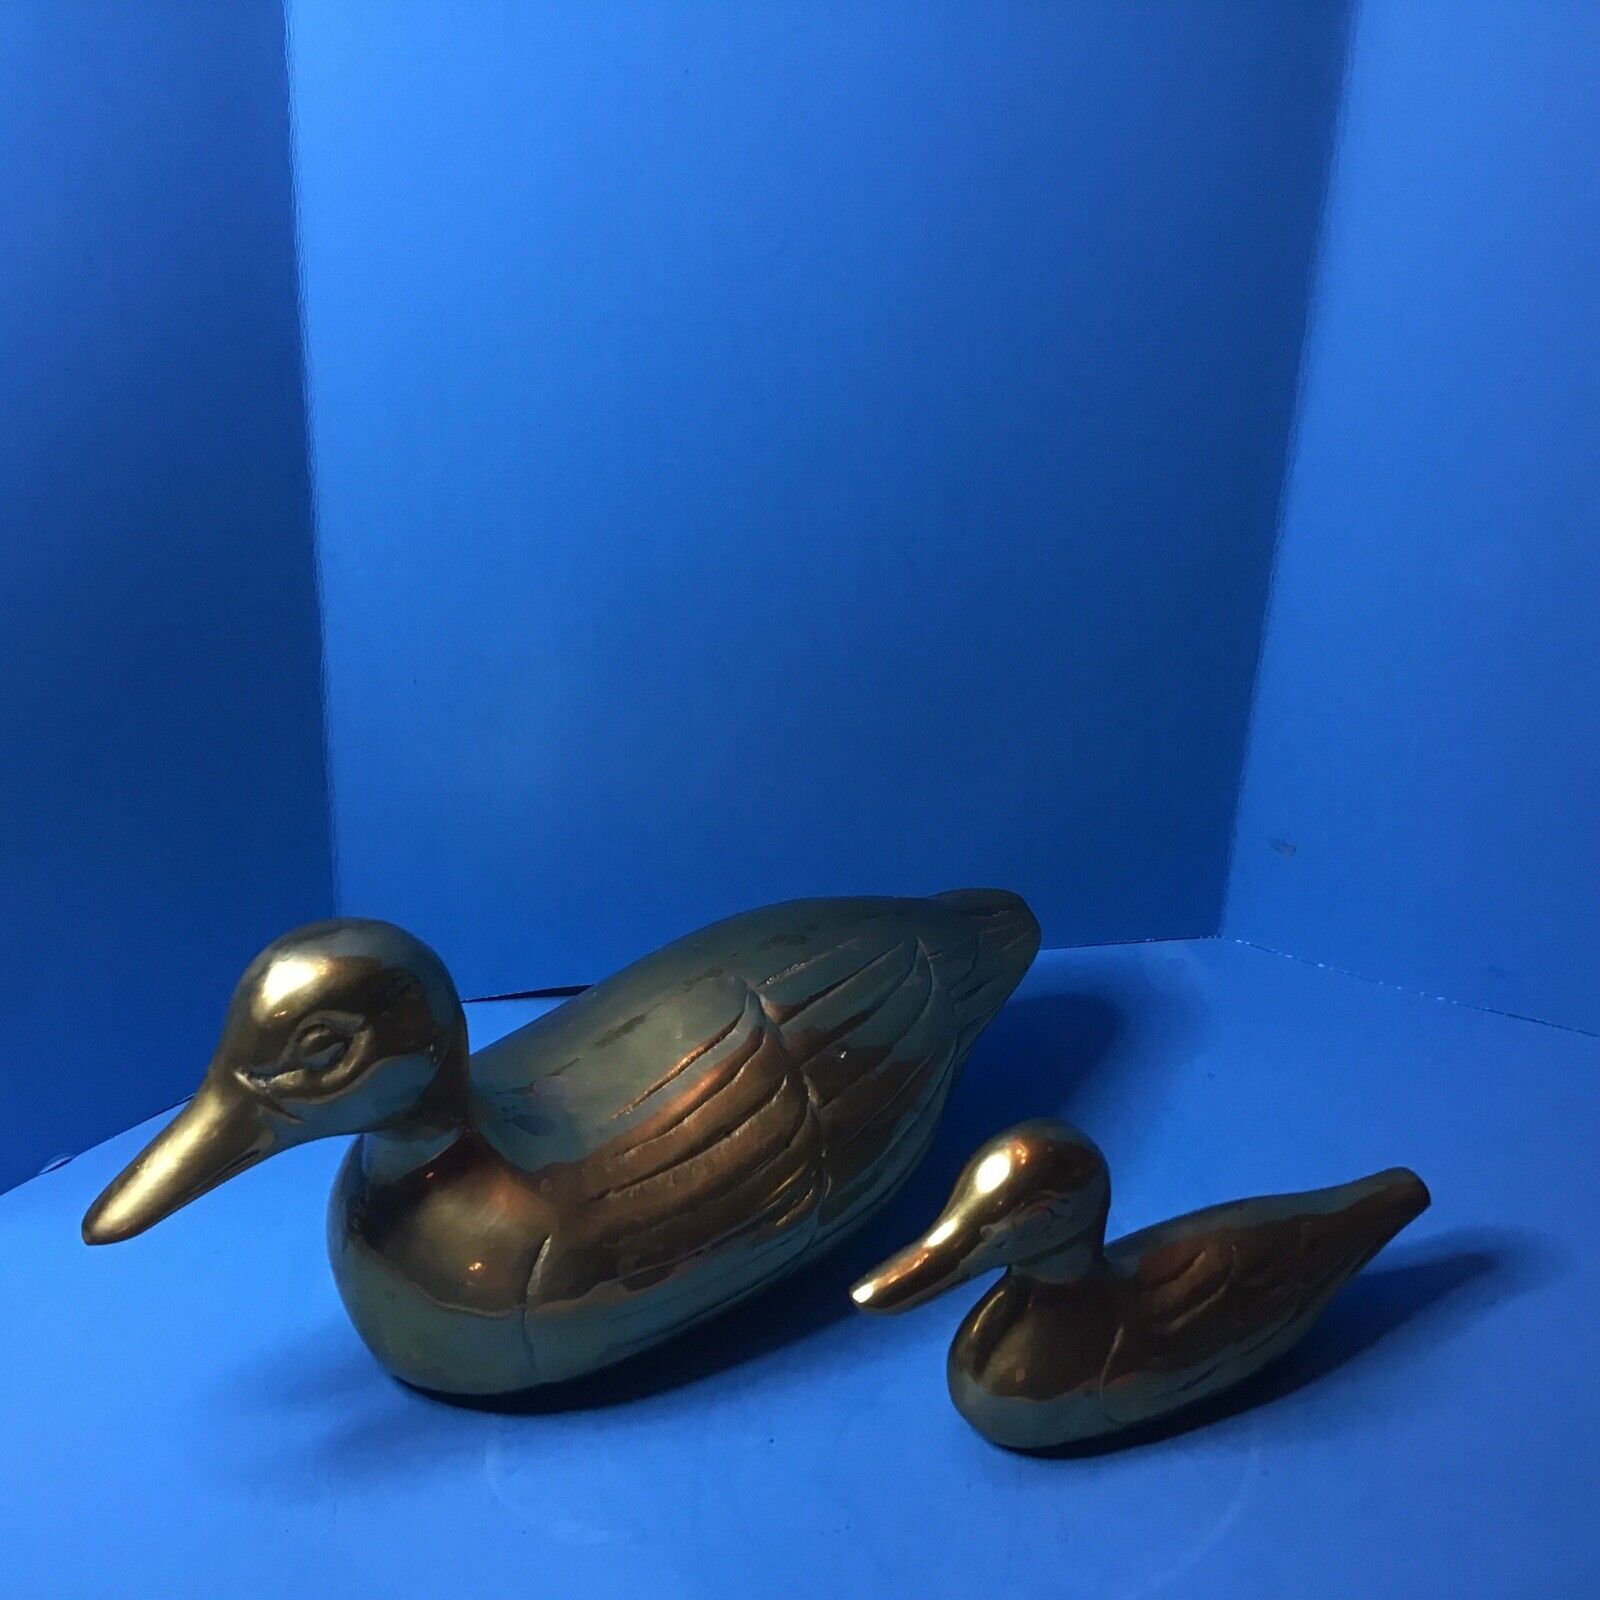 2 Rare Vintage Large Solid Brass Ducks  1 Large 1 Small Total Weight Of 3.5LBS